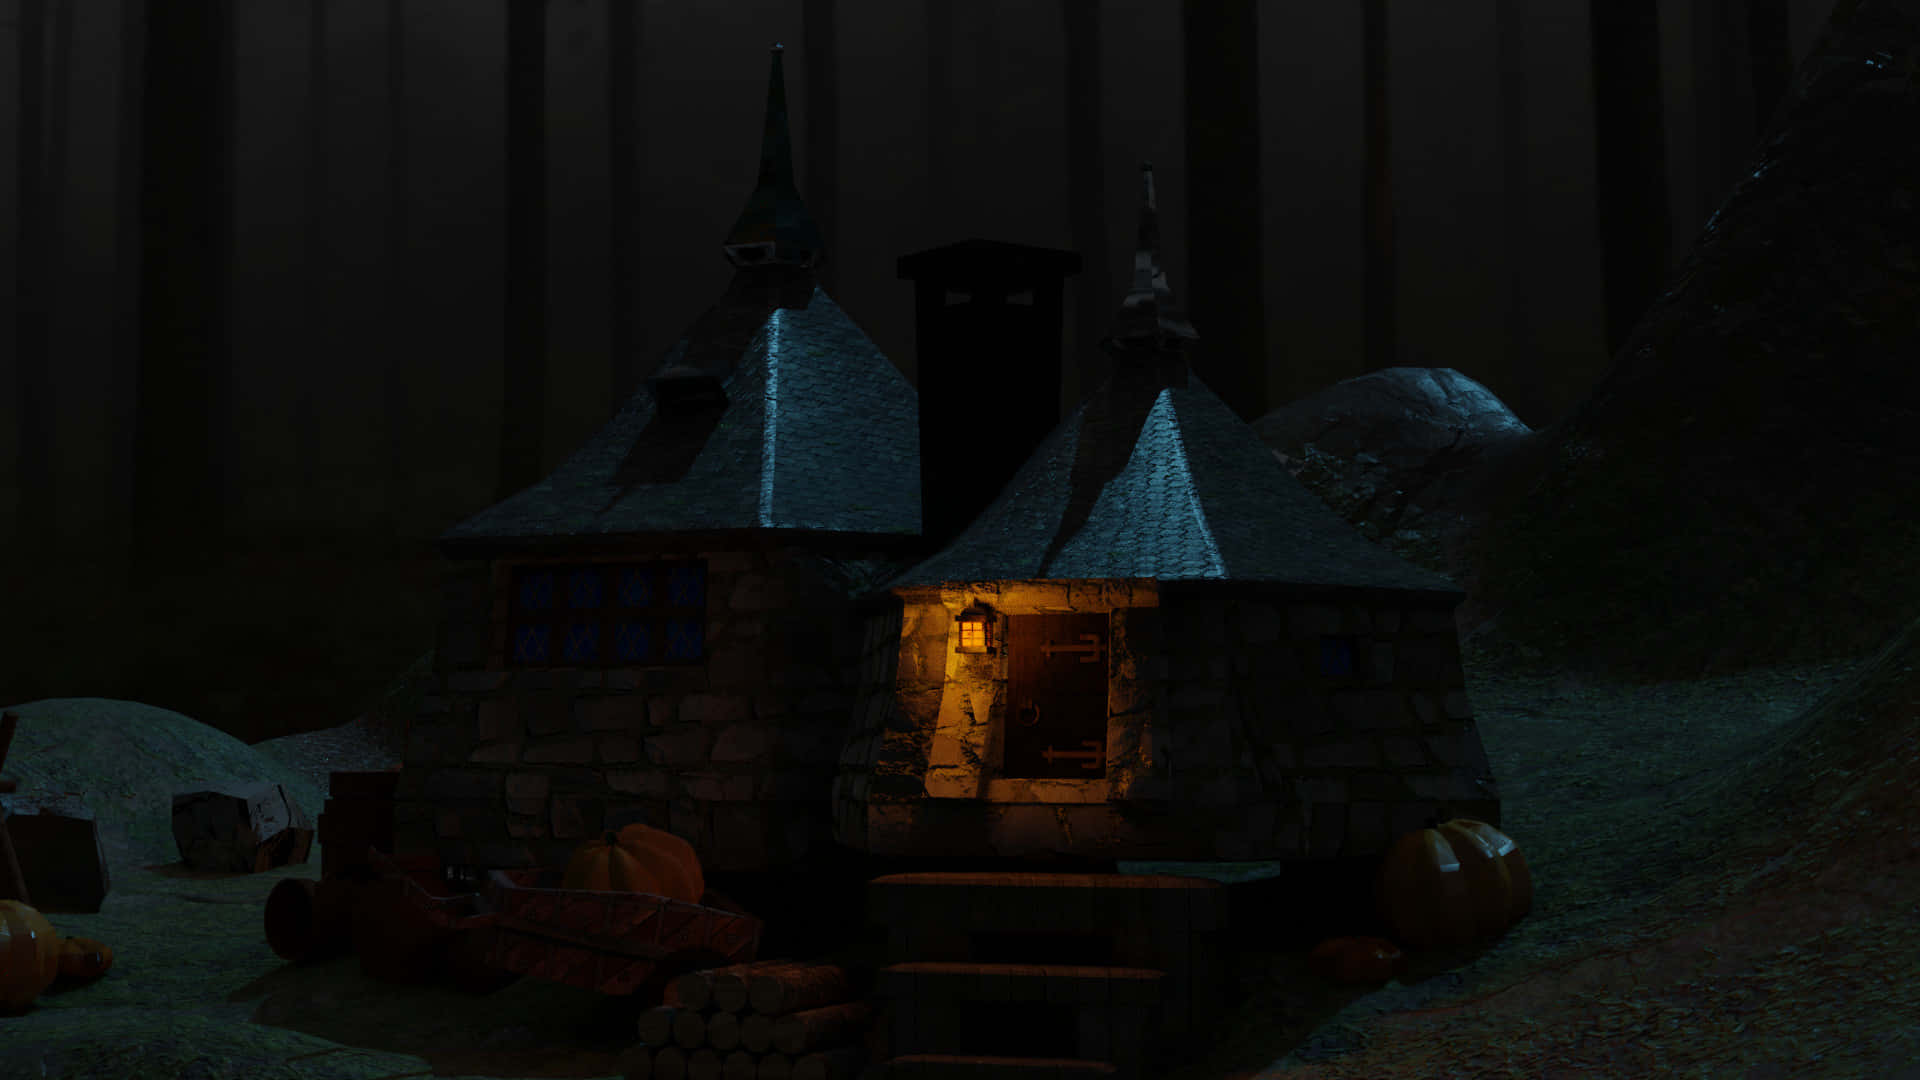 Magical Hagrid's Hut at Night in the Wizarding World of Harry Potter Wallpaper